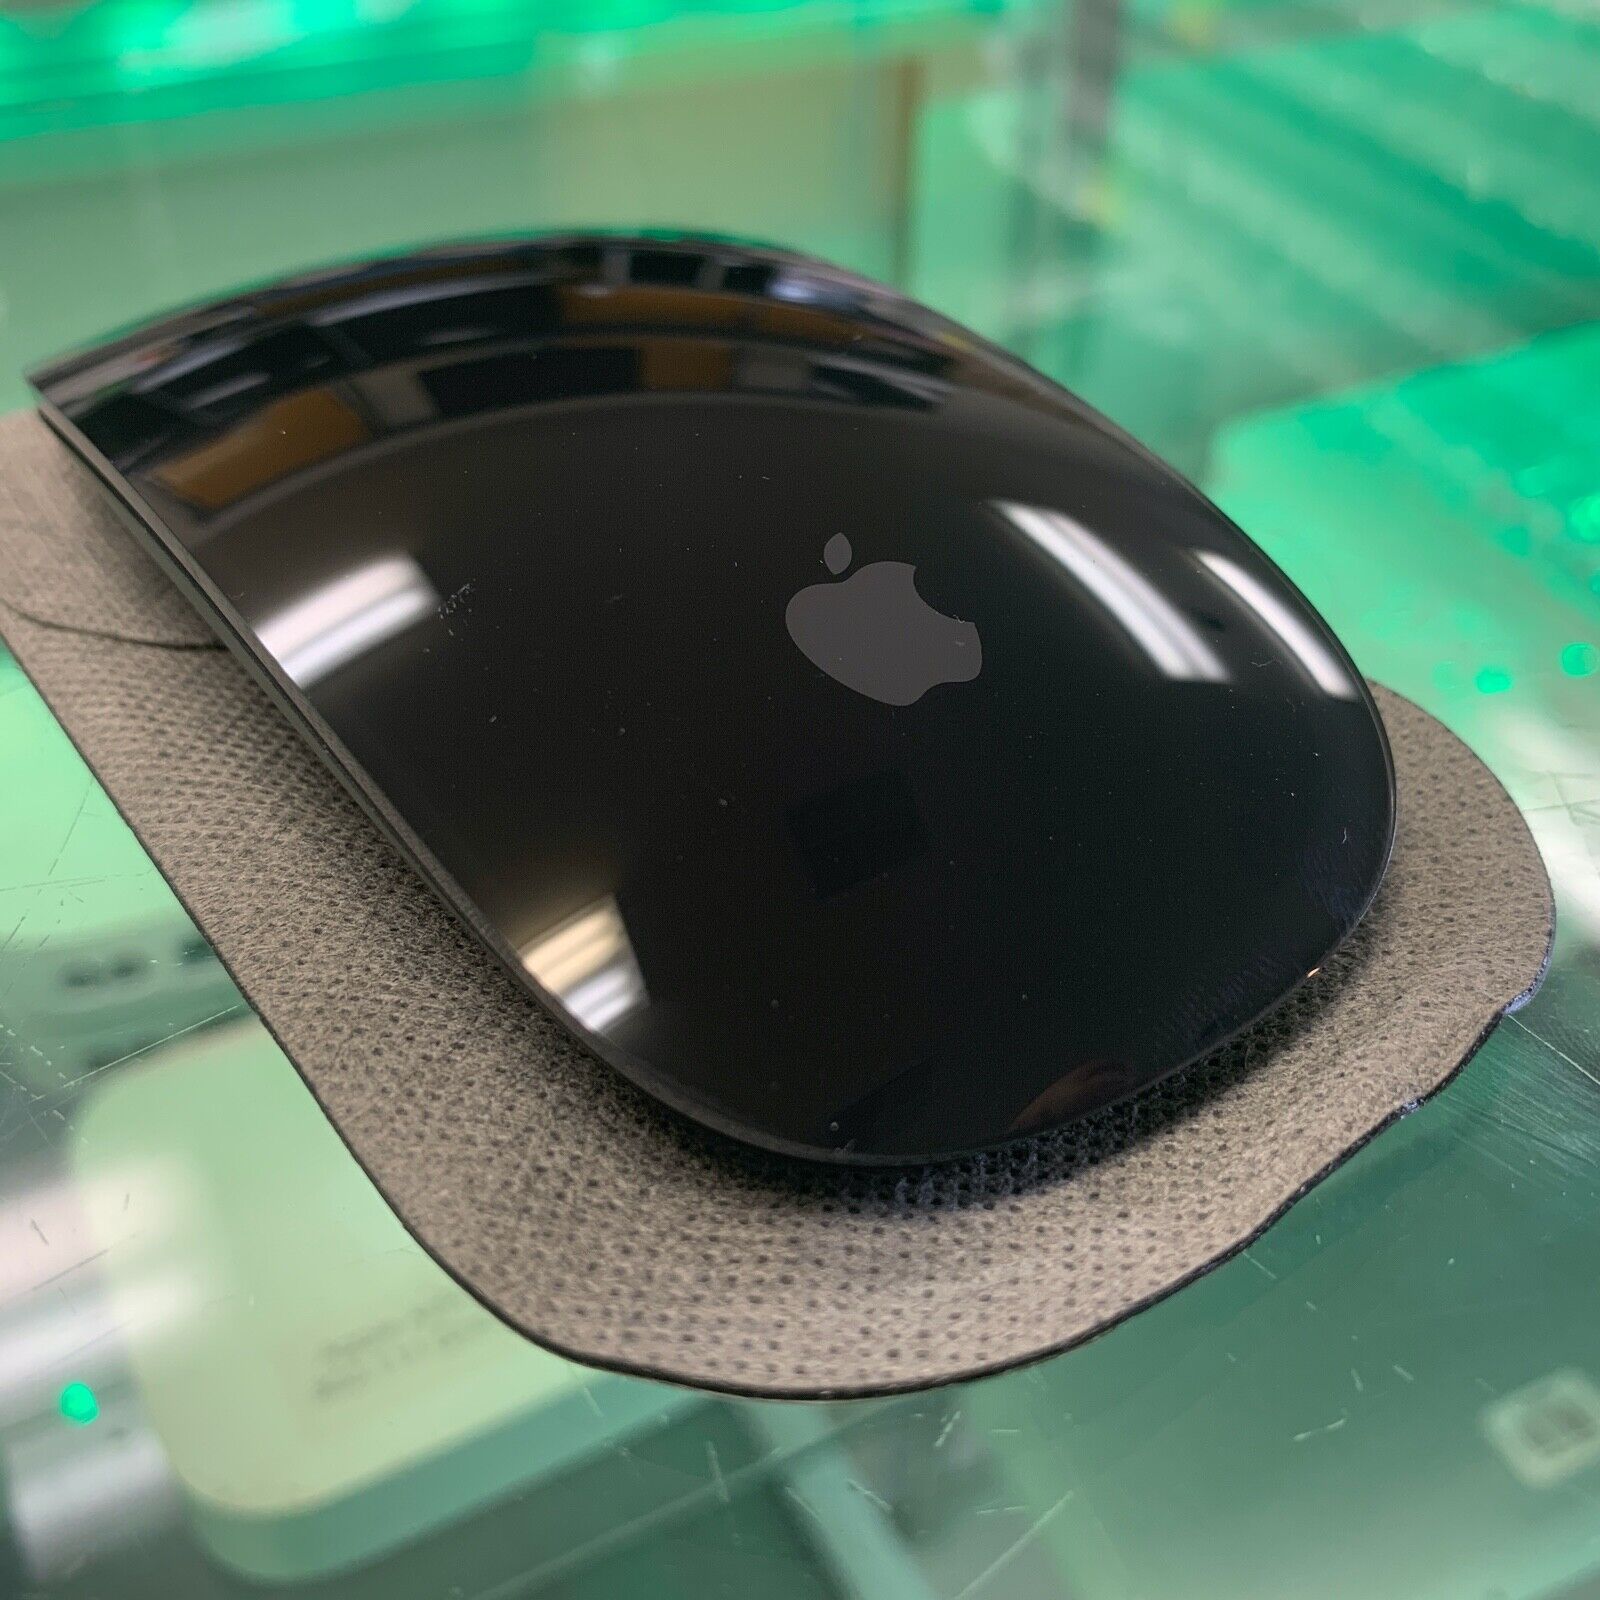 Apple Magic Mouse 2 Space Gray MRME2LL/A NEW | eBay